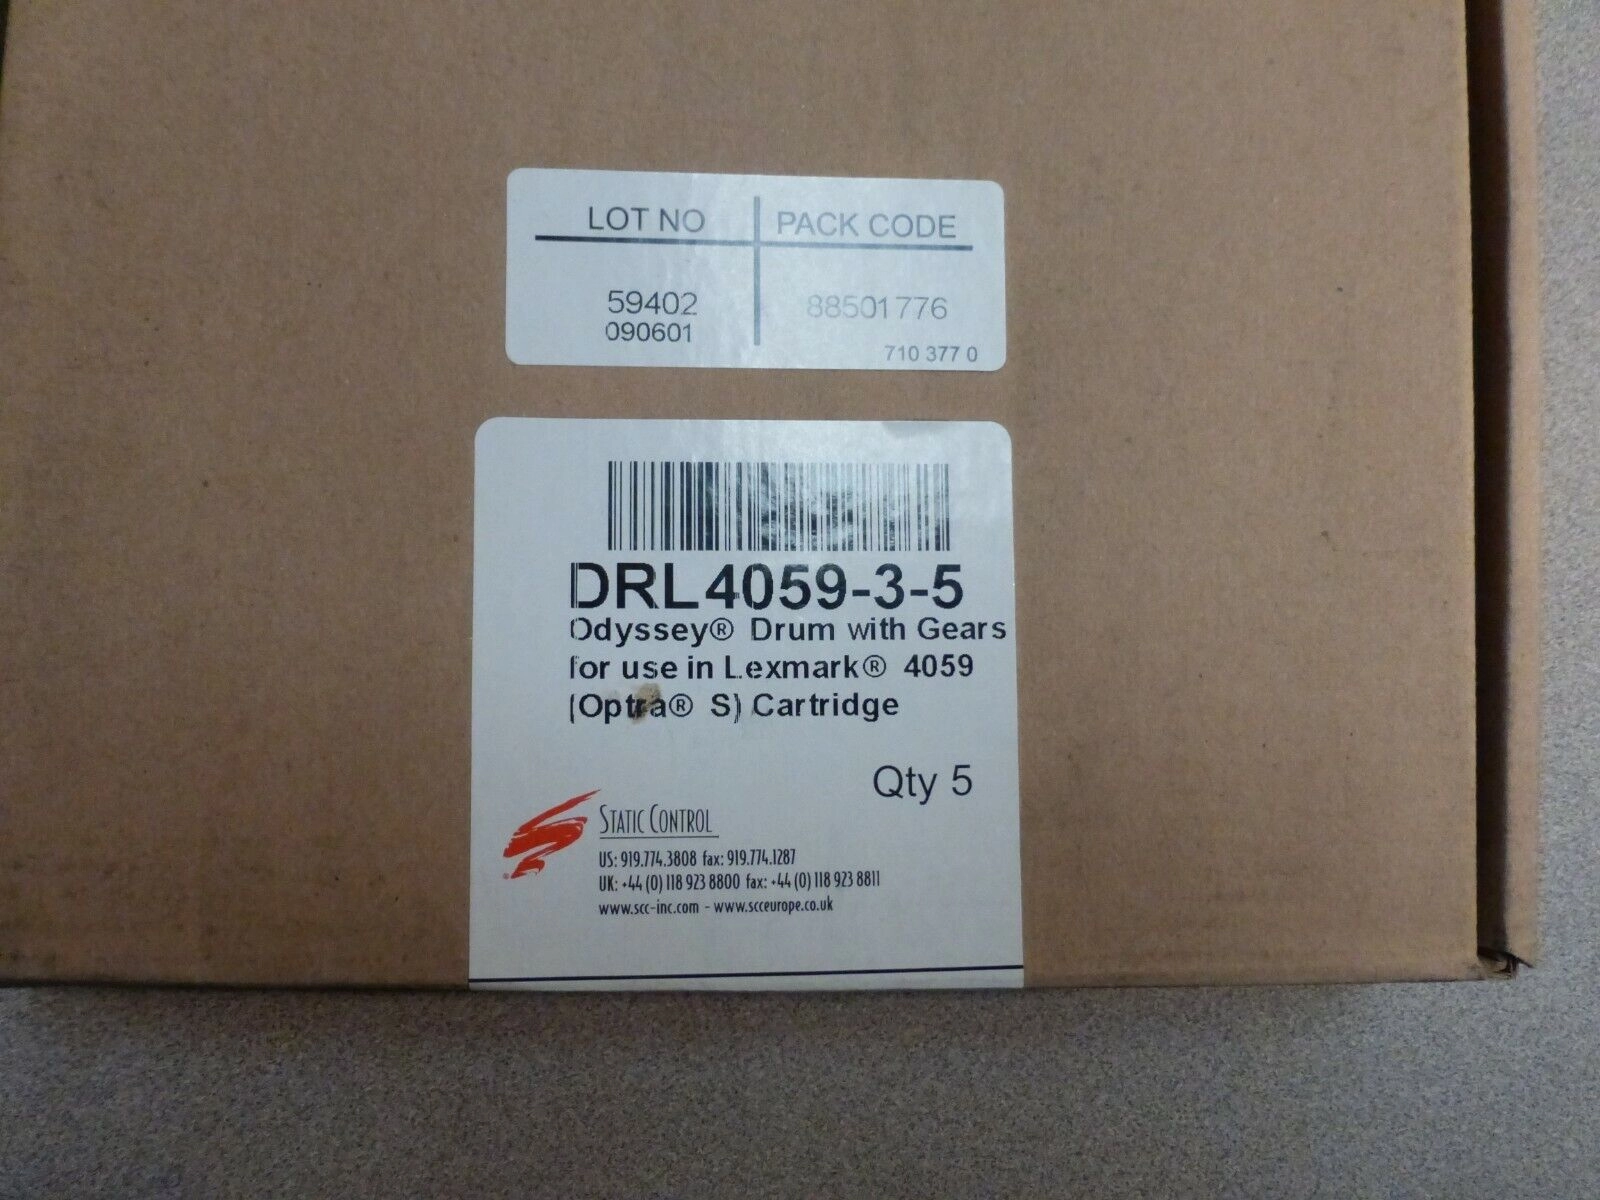 DRHP38-5, DR5K-5, H5DR2105-DRUMS for HP3000/3600/3